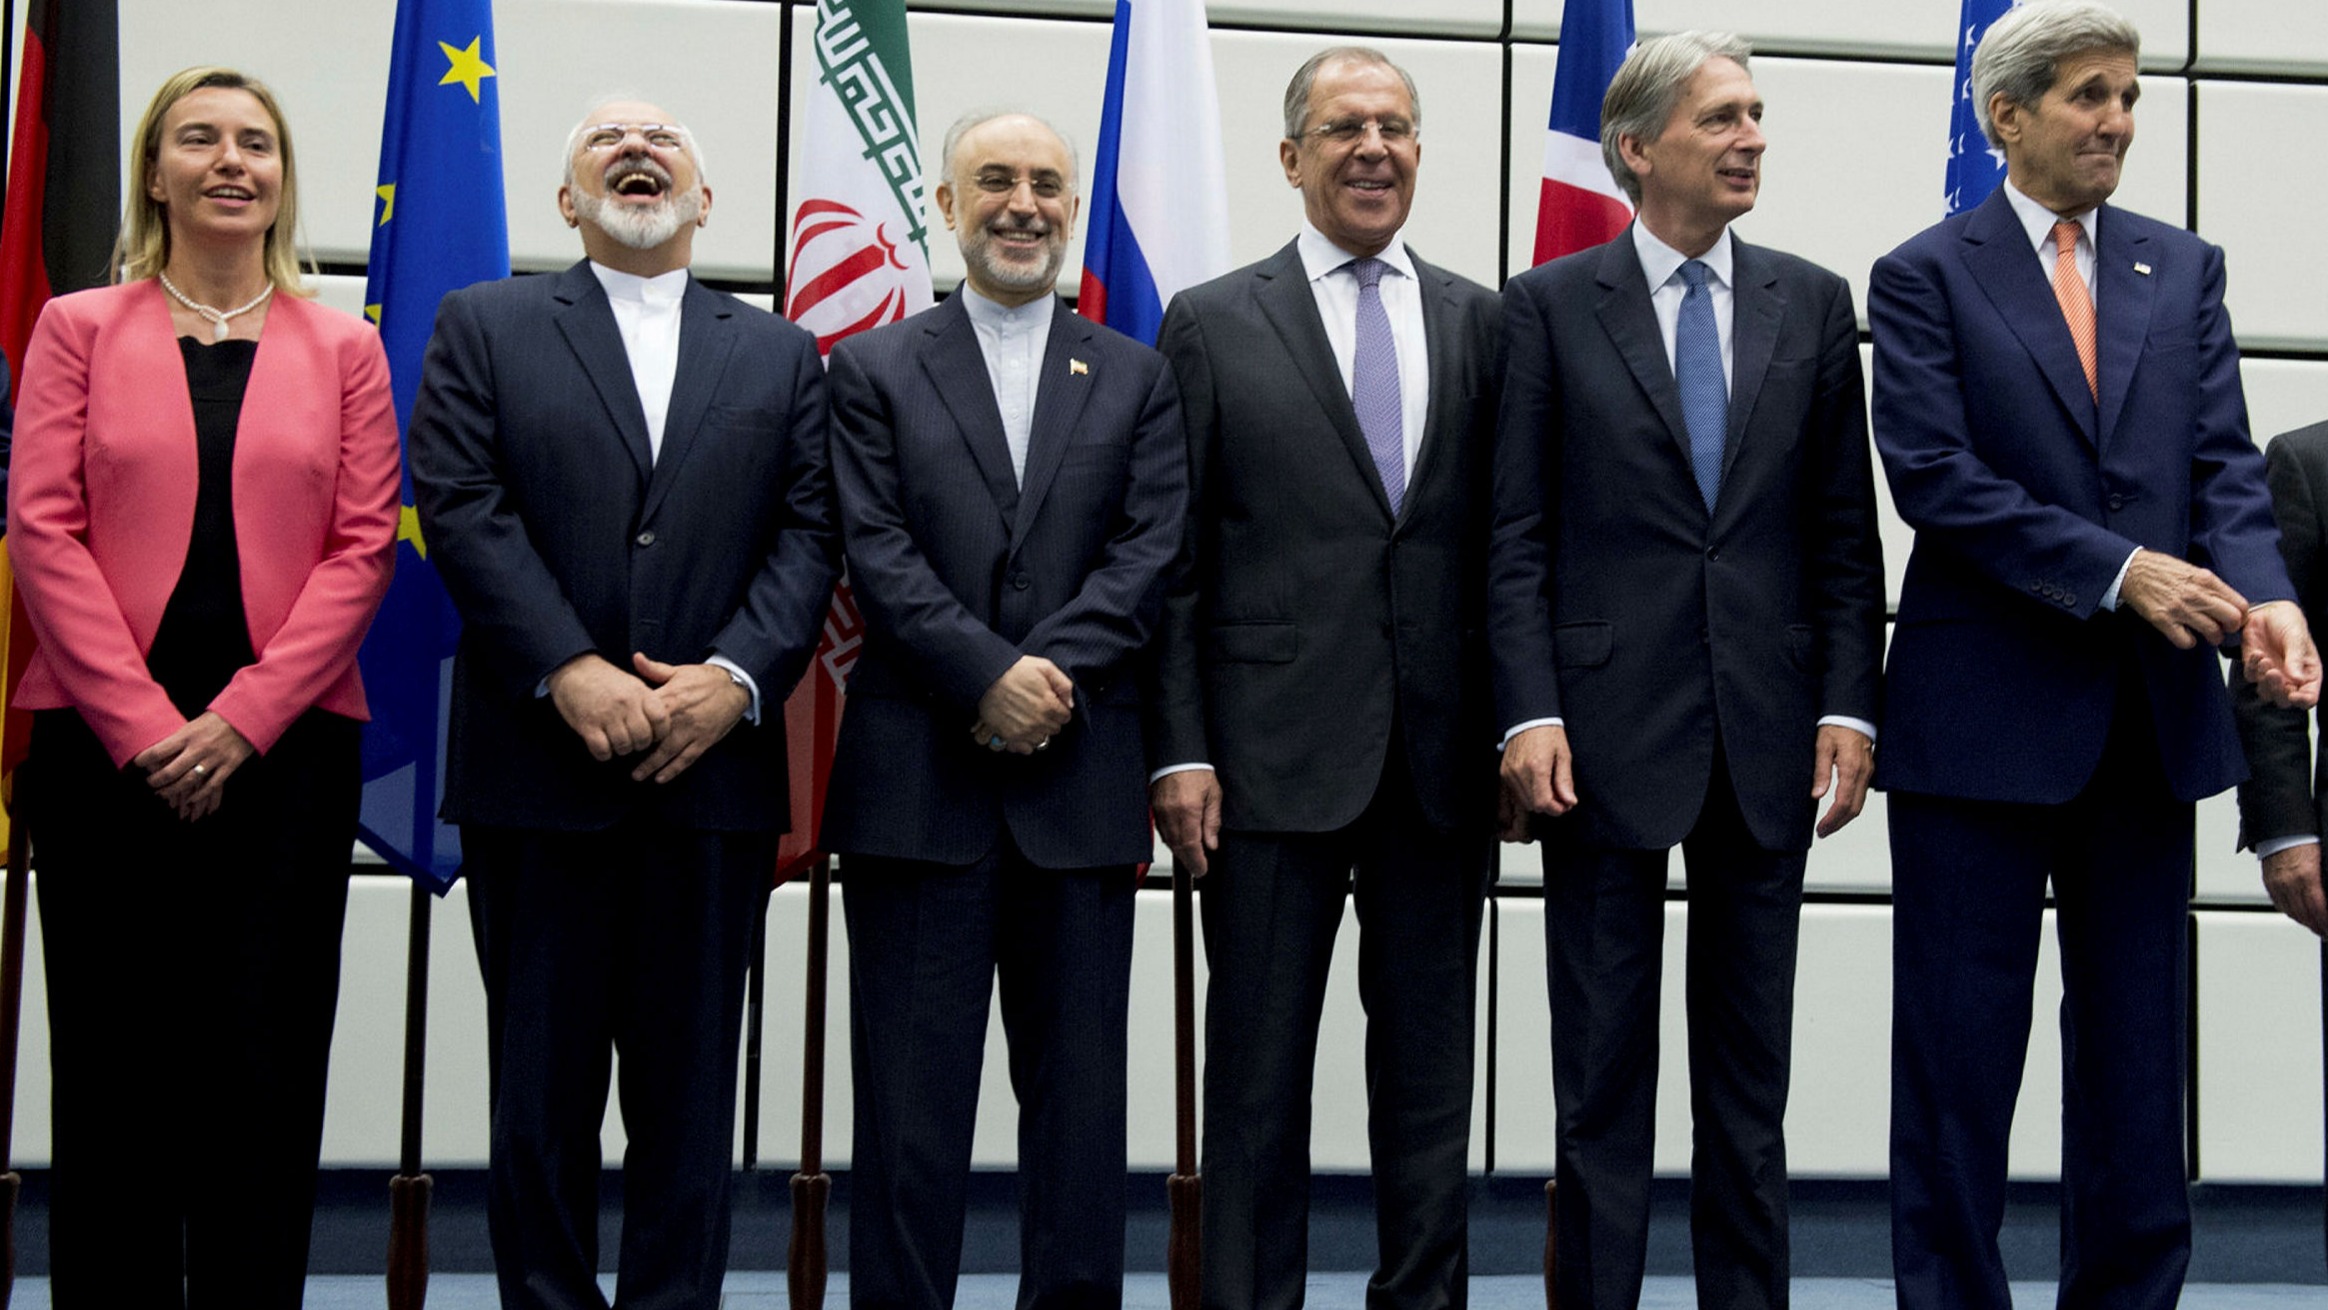 Iran nuclear negotiator: Talks must address removal of sanctions | Financial Times